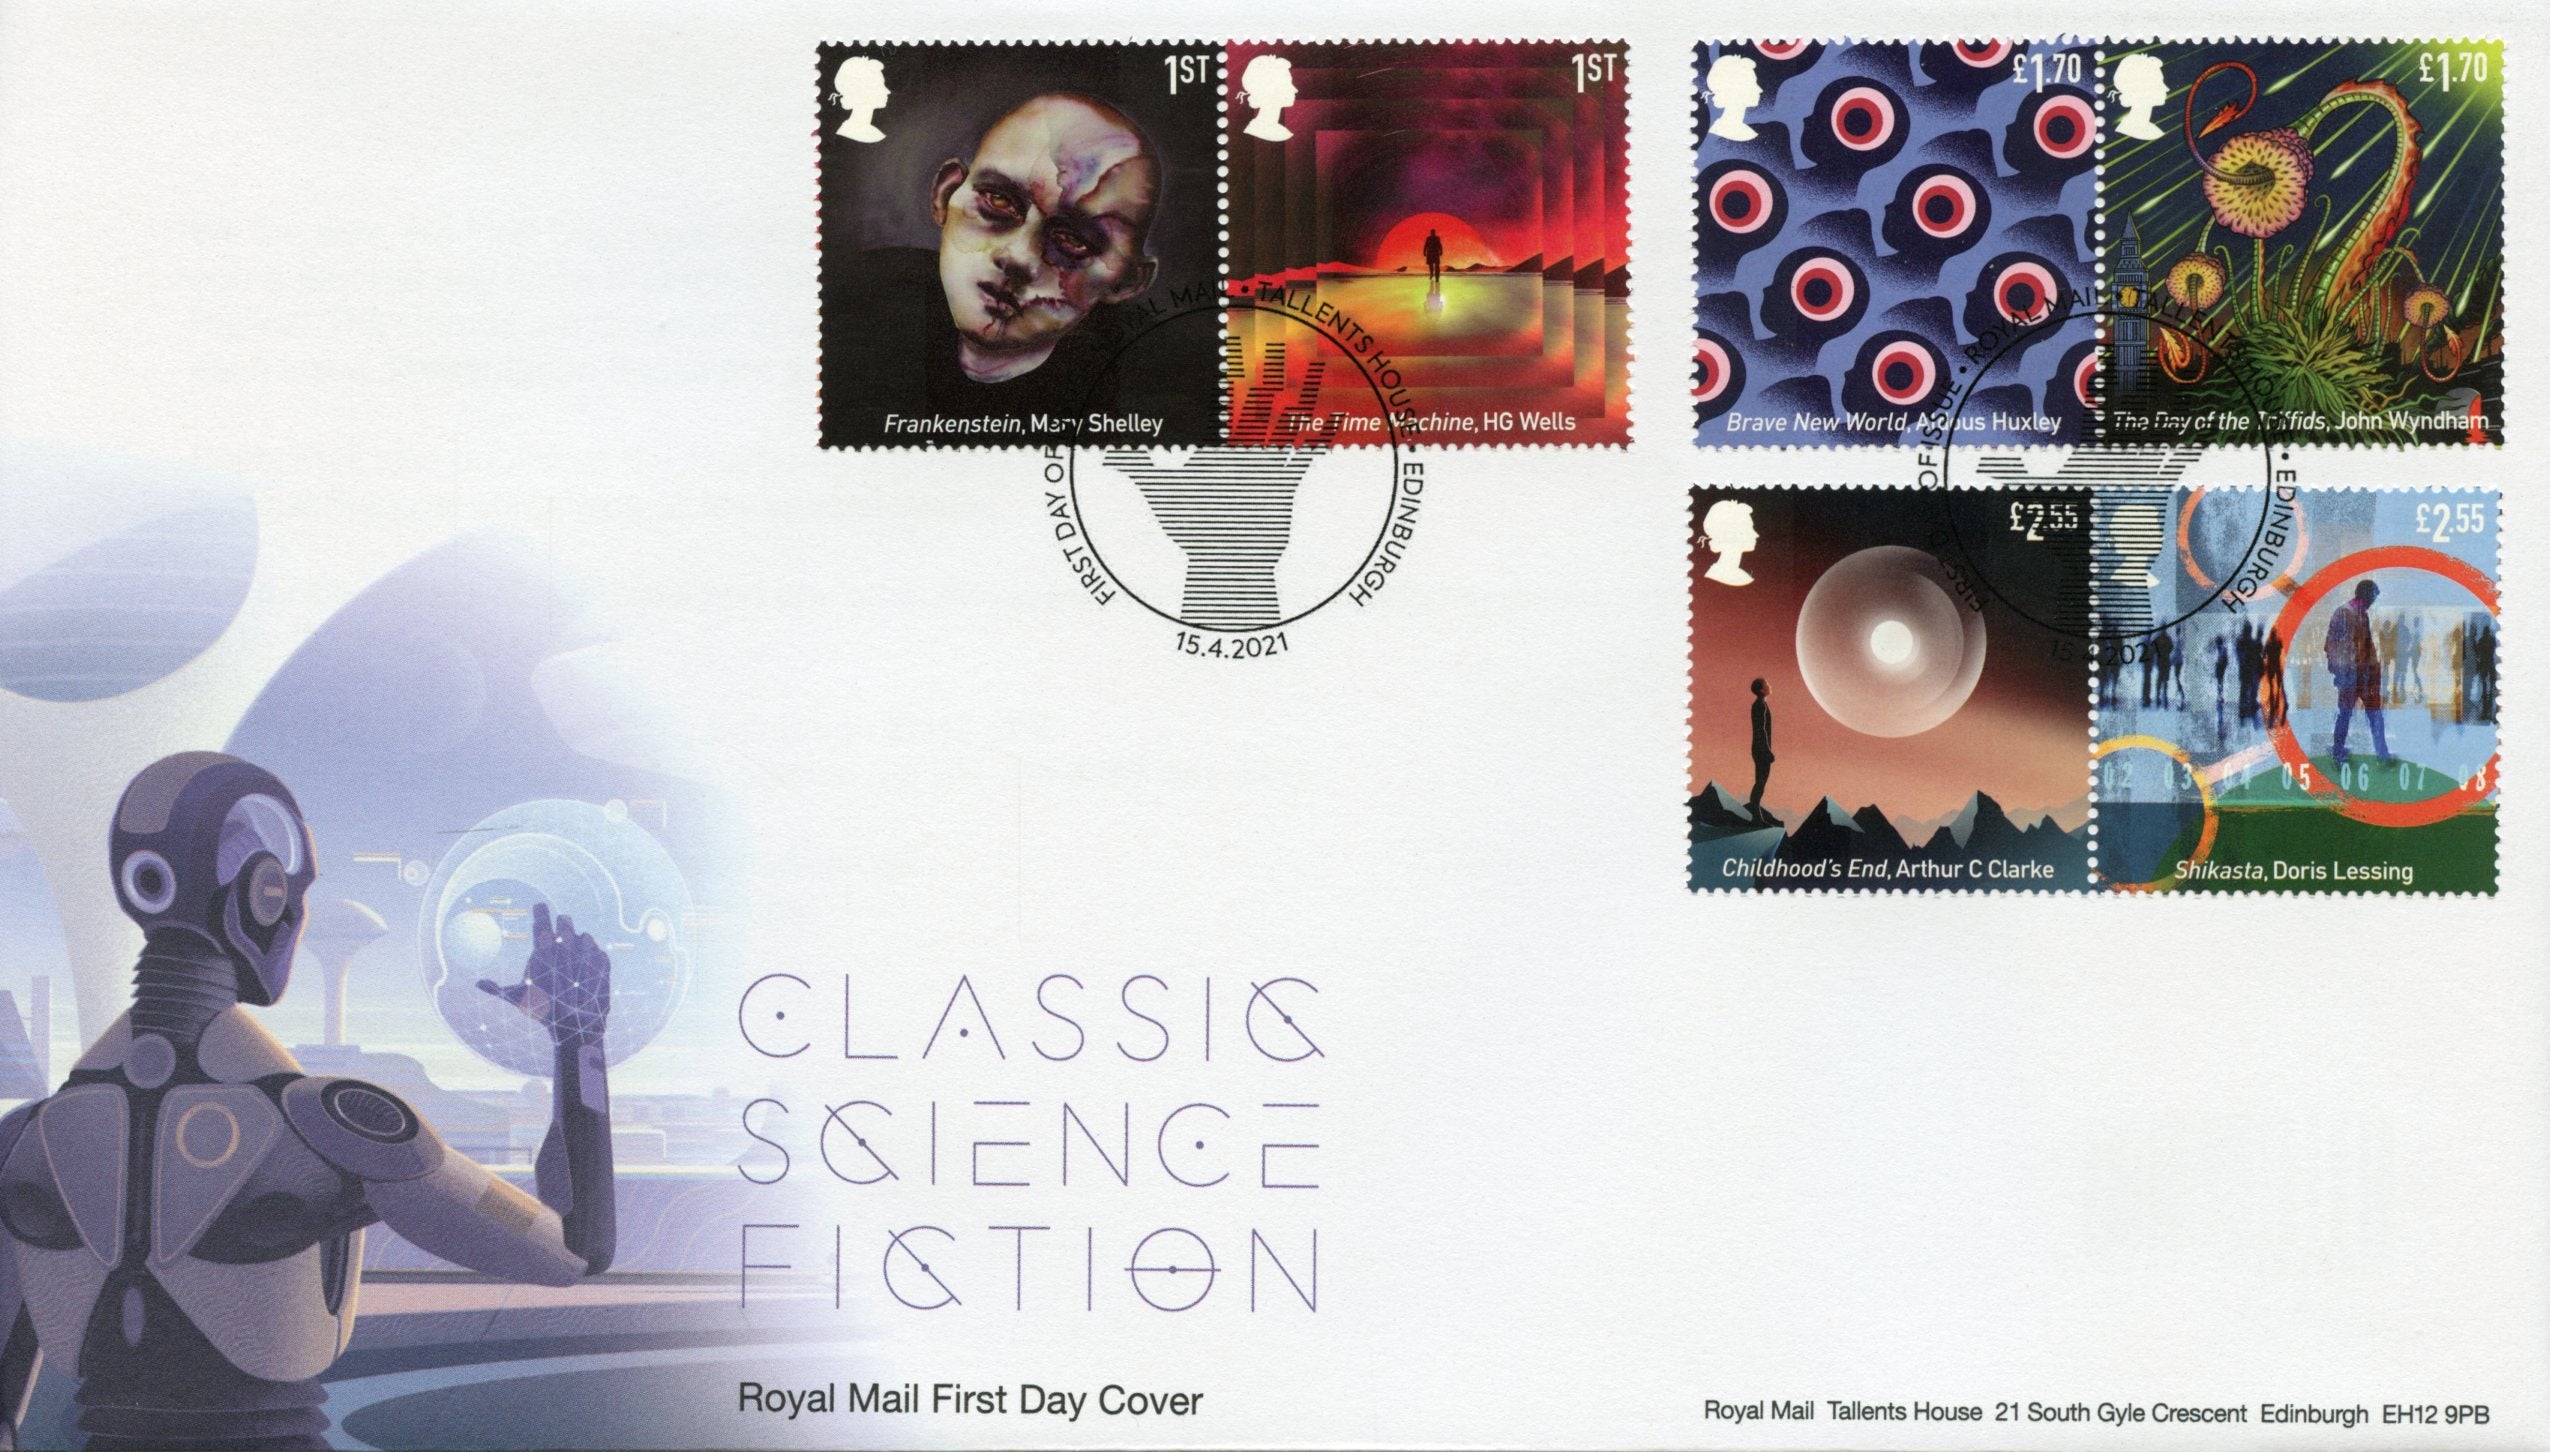 GB 2021 FDC Literature Stamps Classic Science Fiction Time Machine HG Wells 6v Set